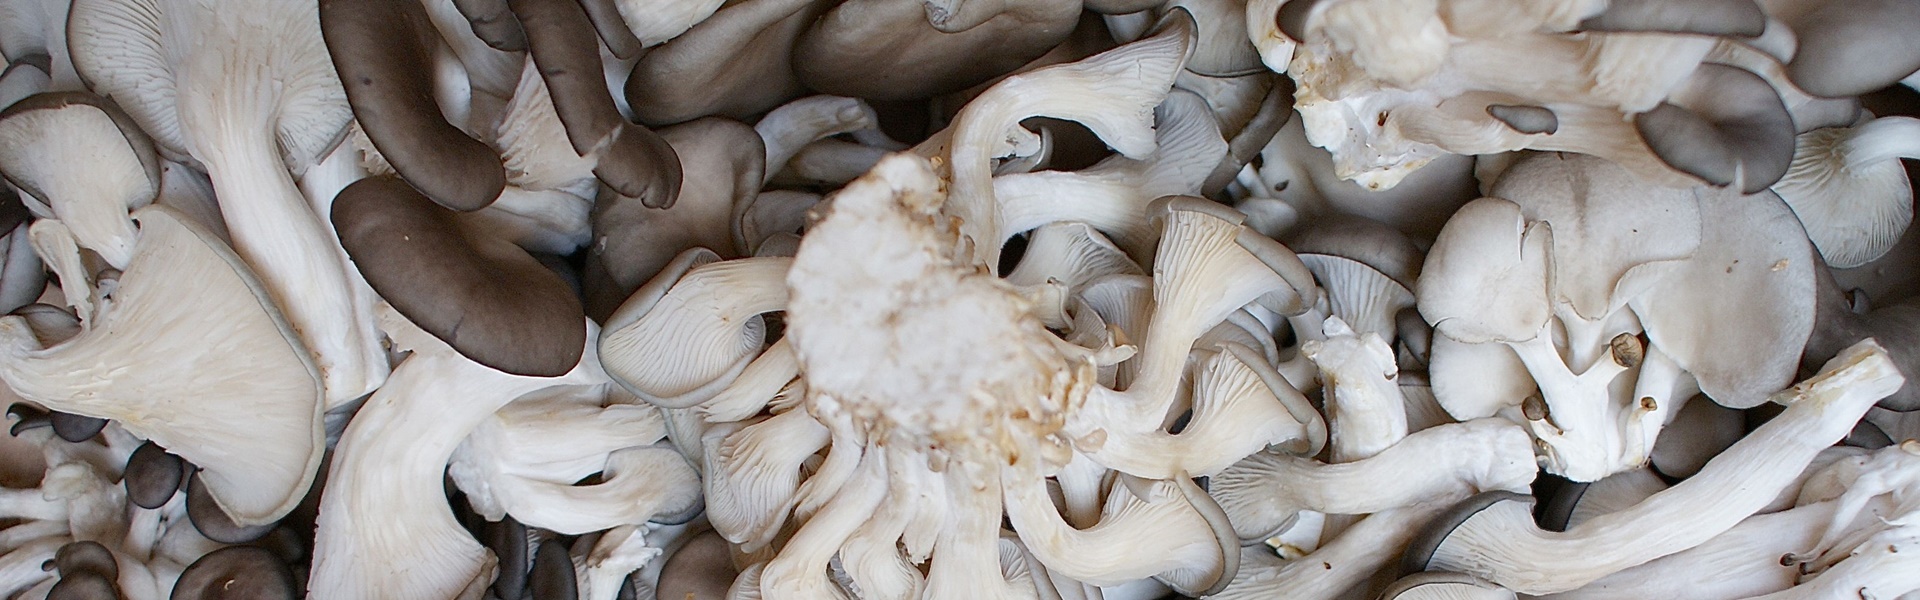 How to grow oyster mushrooms at home 3